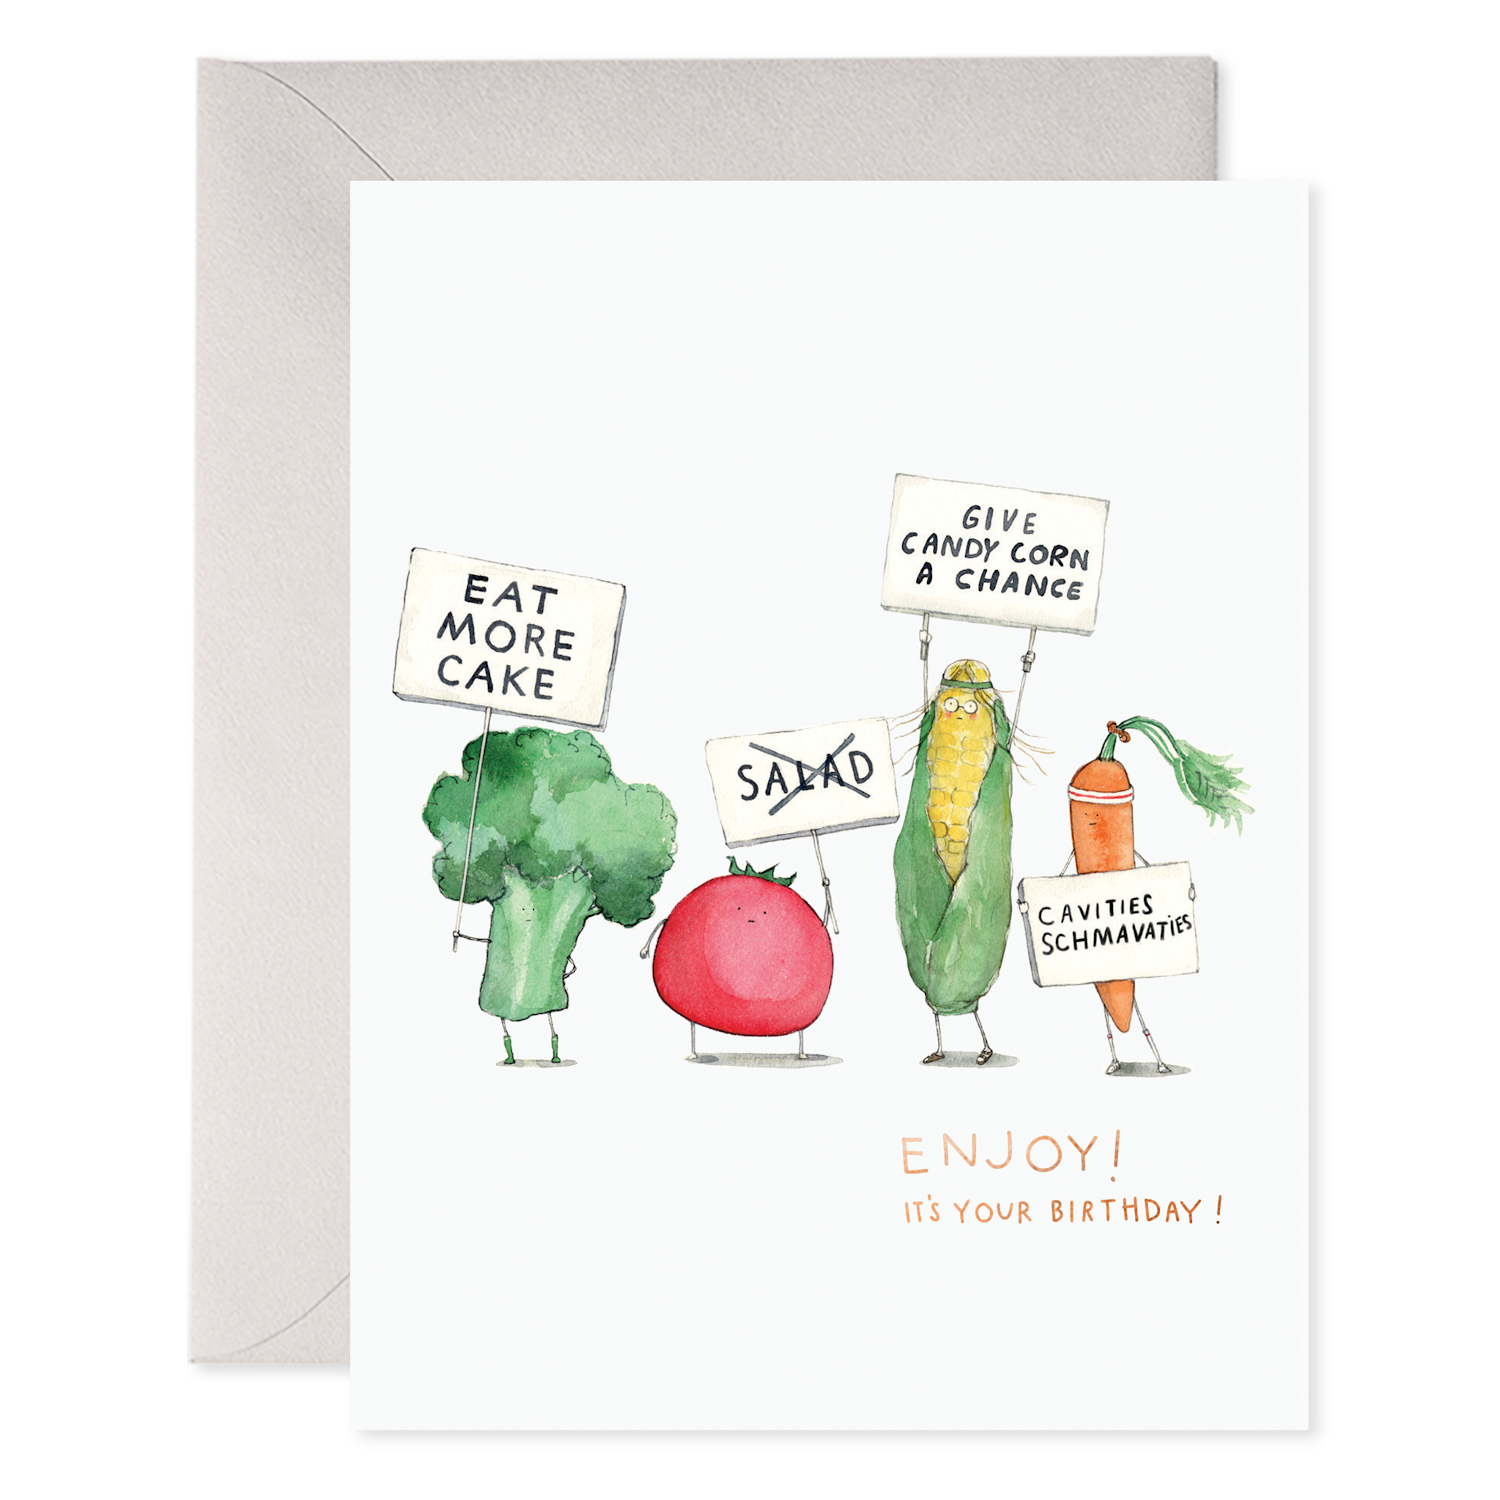 Cartoon vegetables and E. Frances Veggie Strike card sweets with humorous slogans on a birthday card.